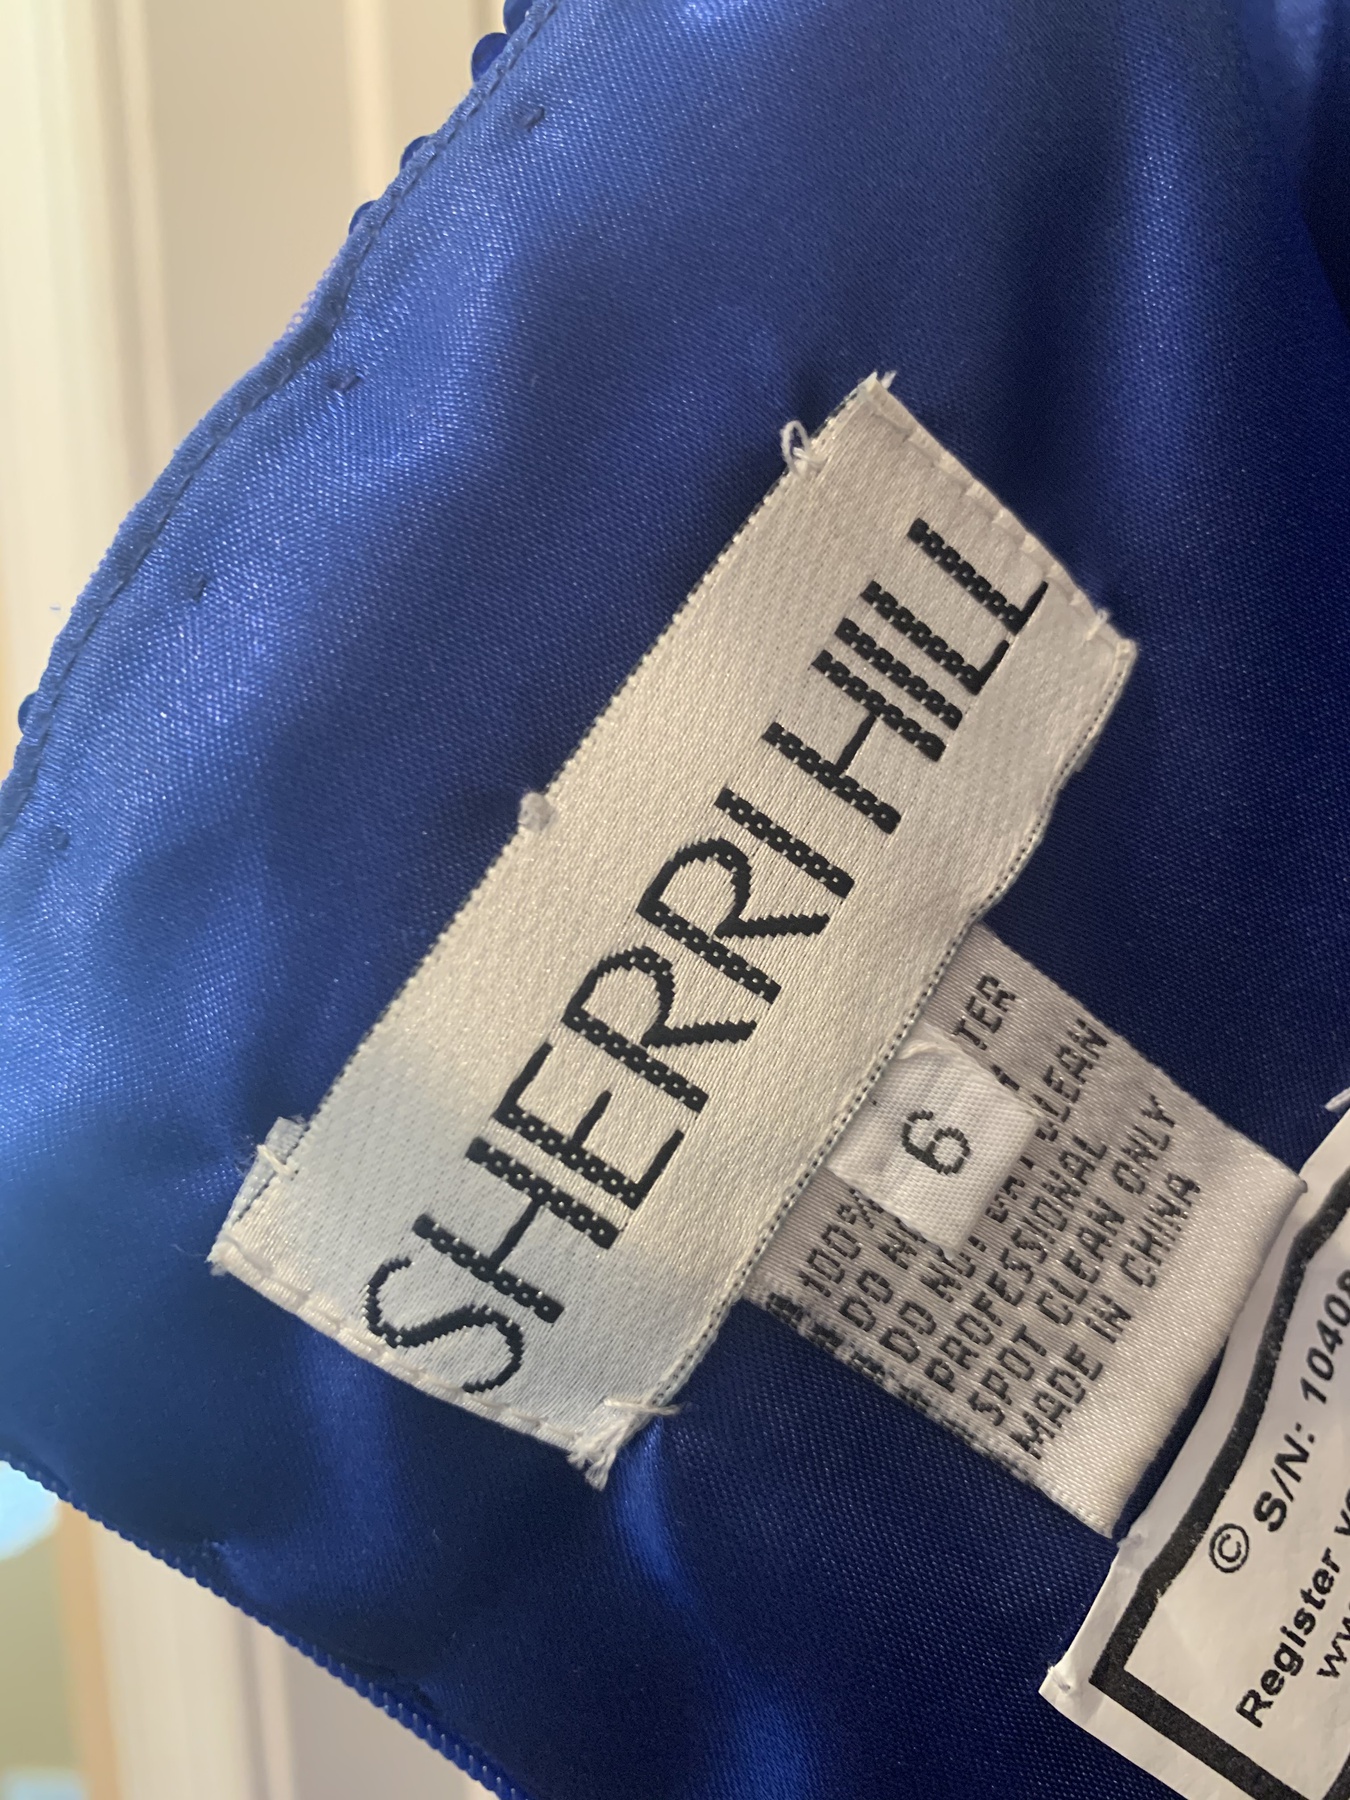 Sherri Hill Size 6 Homecoming Strapless Royal Blue Cocktail Dress on Queenly